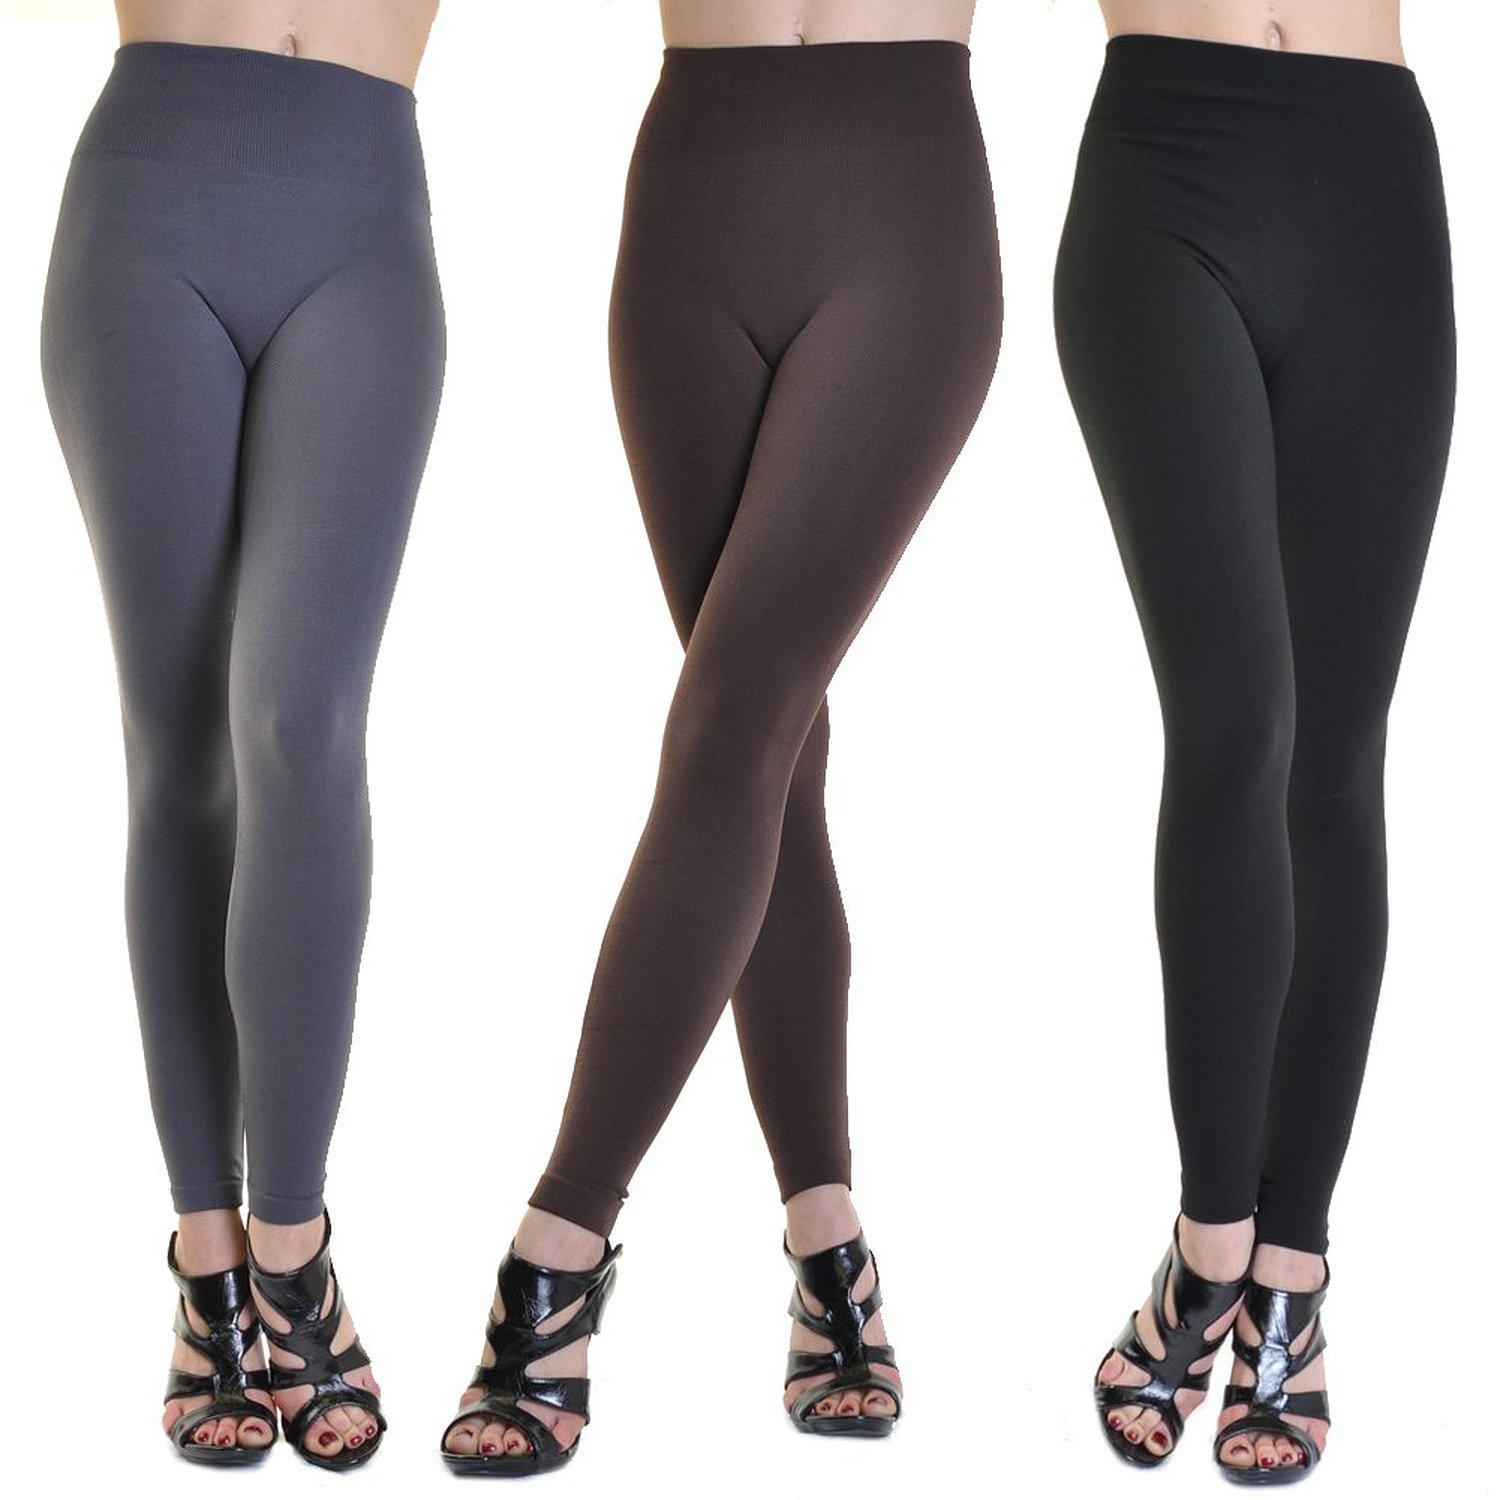 What are the differences between pantyhose, tights, stockings, and leggings?  - Quora